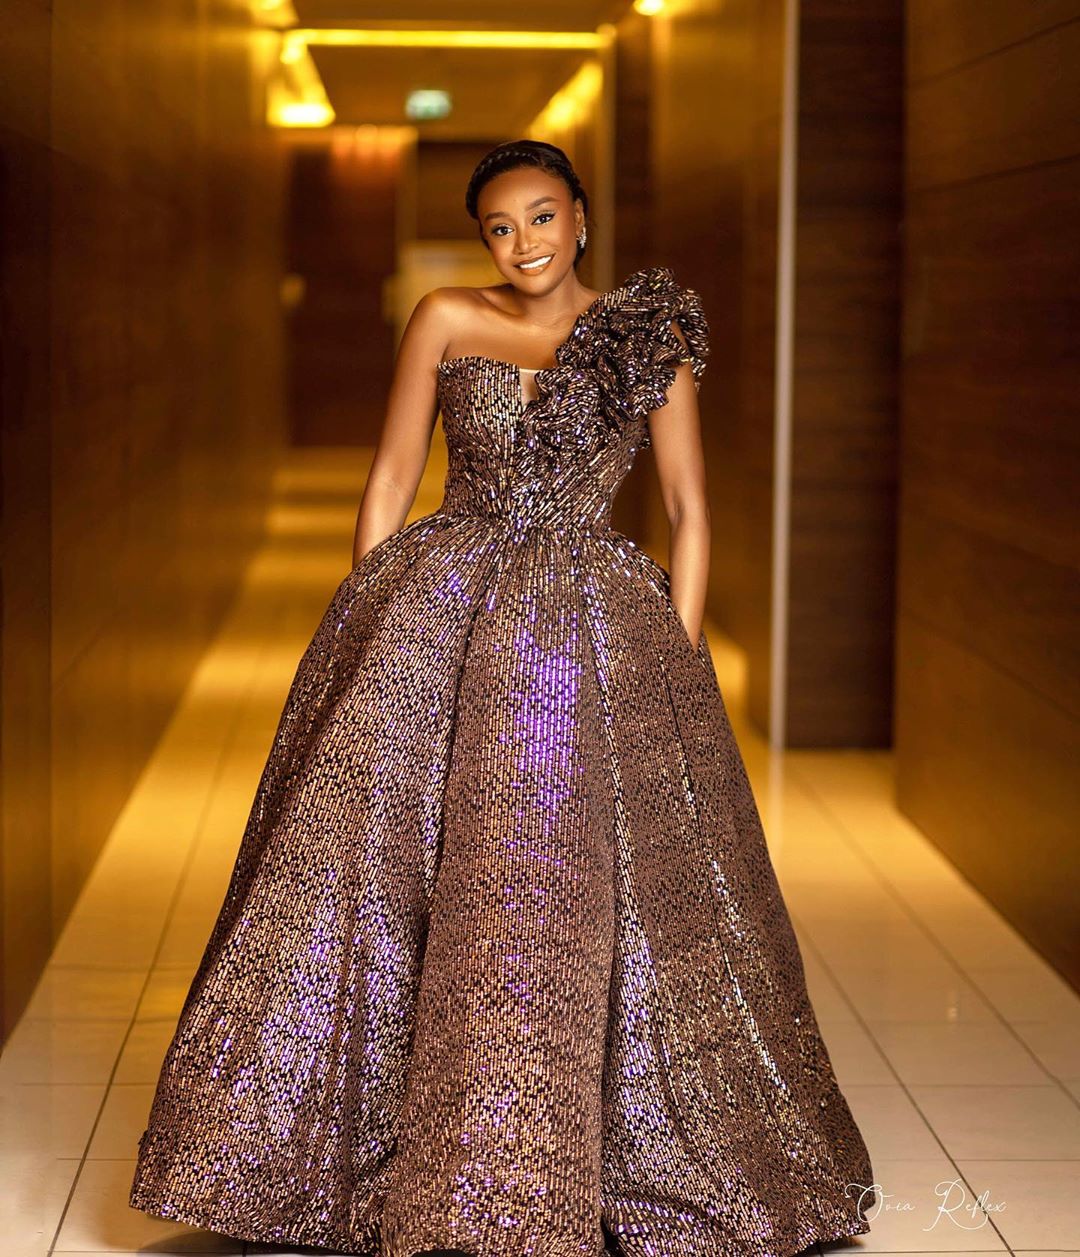 michelle-dede-ebony-life-films-tv-your-excellency-movie-premiere-inauguration-ball